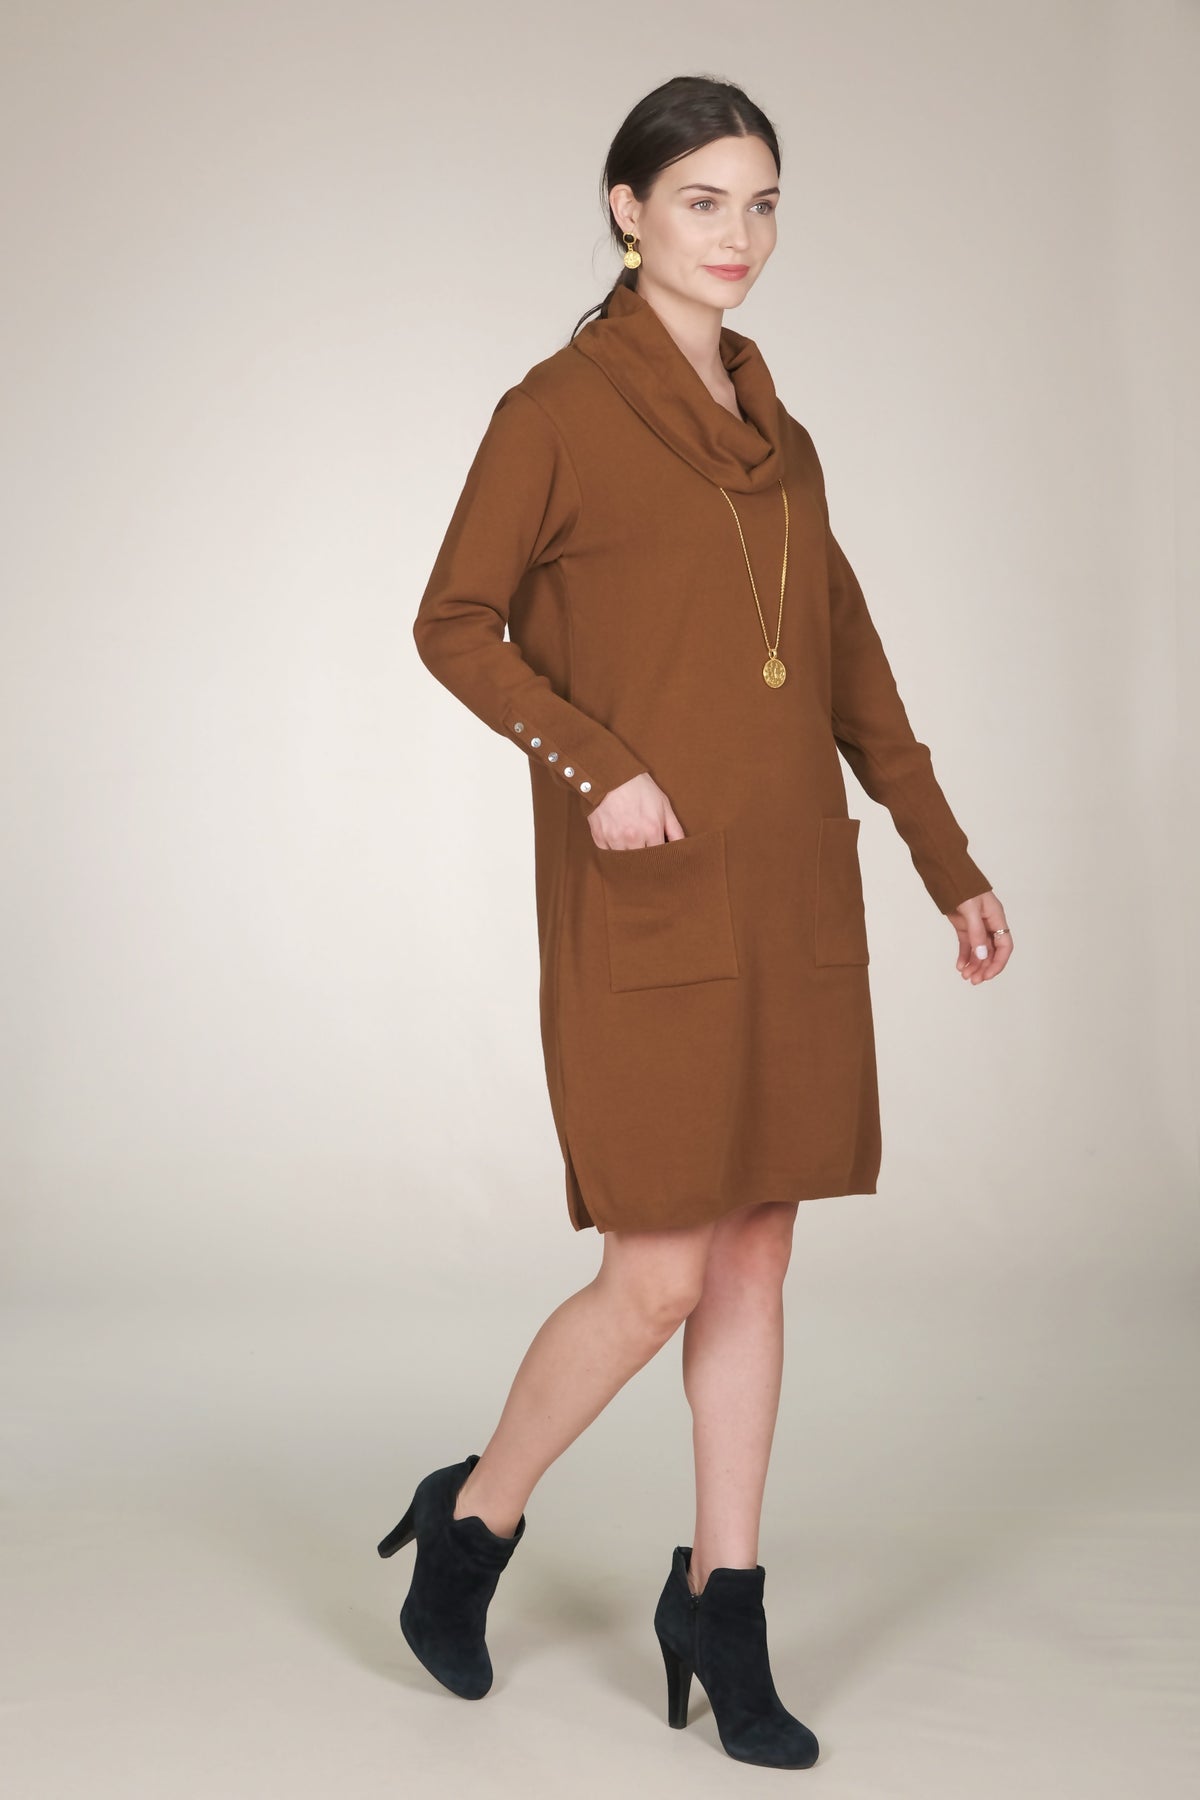 37” Long Sleeve Cowl Dress with Pockets New Orleans Knitwear